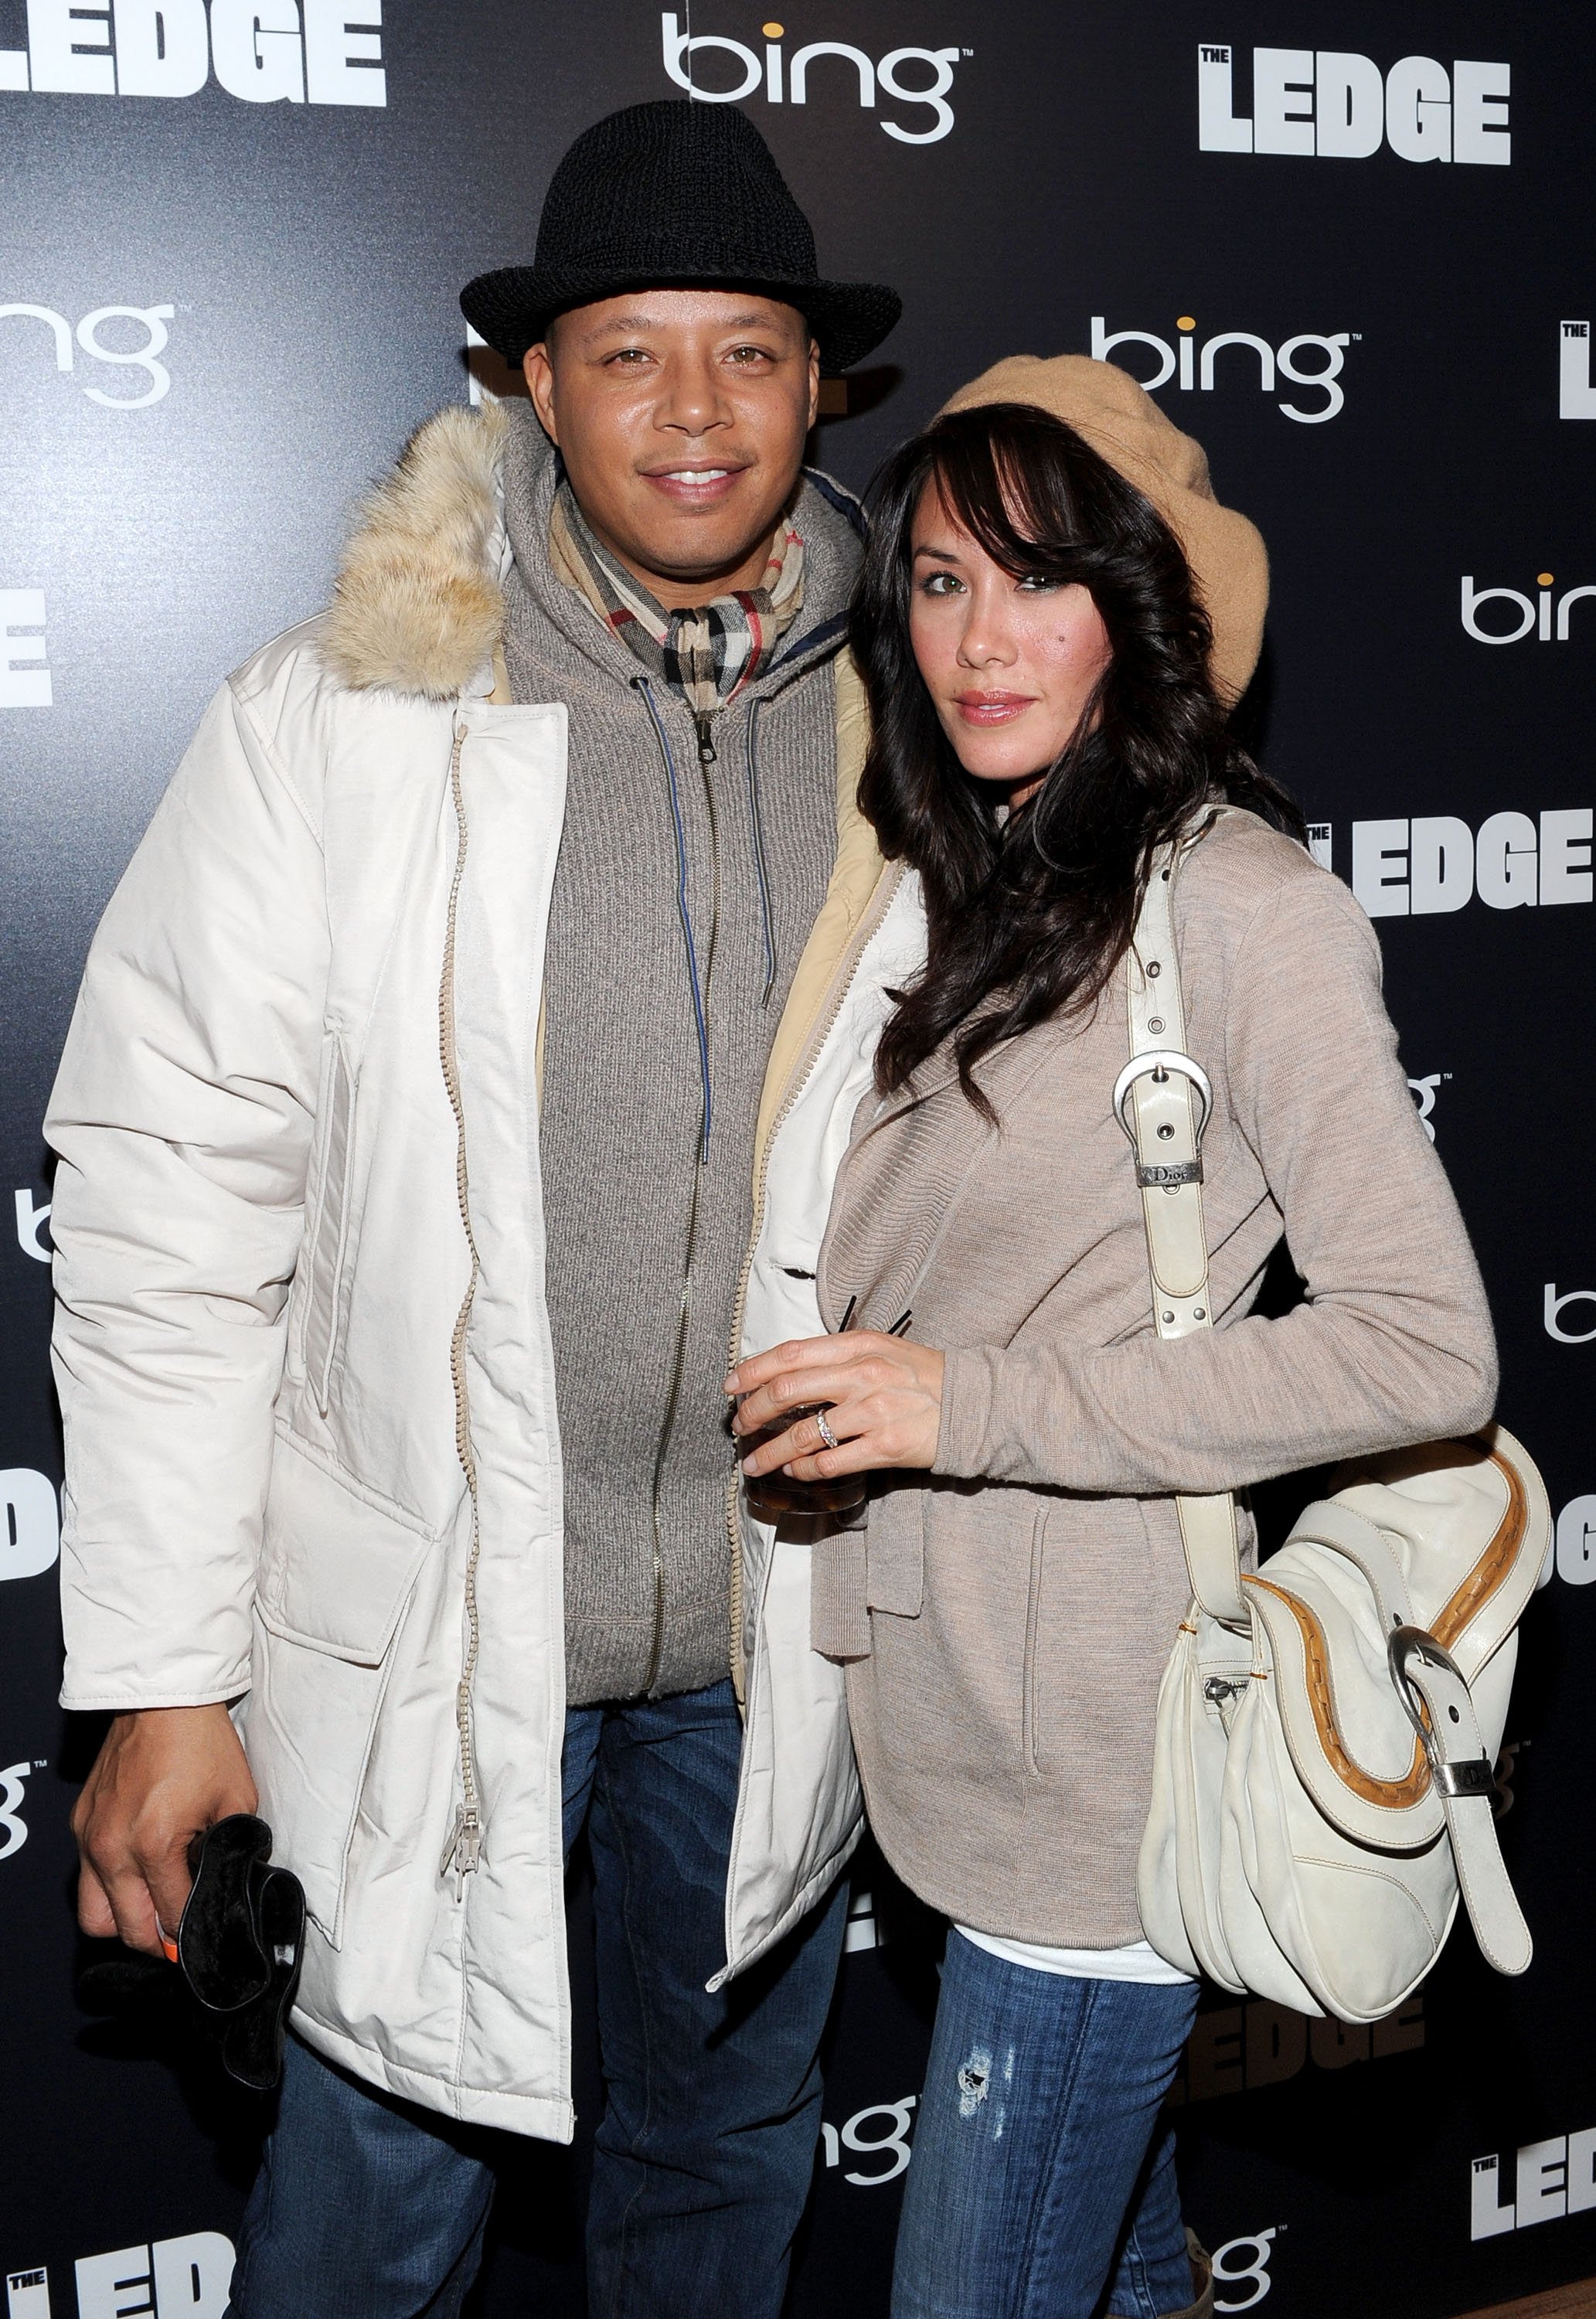 Terrence Howard & Michelle Ghent attend the Bing Bar on Jan. 21, 2011 in Park City, Utah | Photo: Getty Images